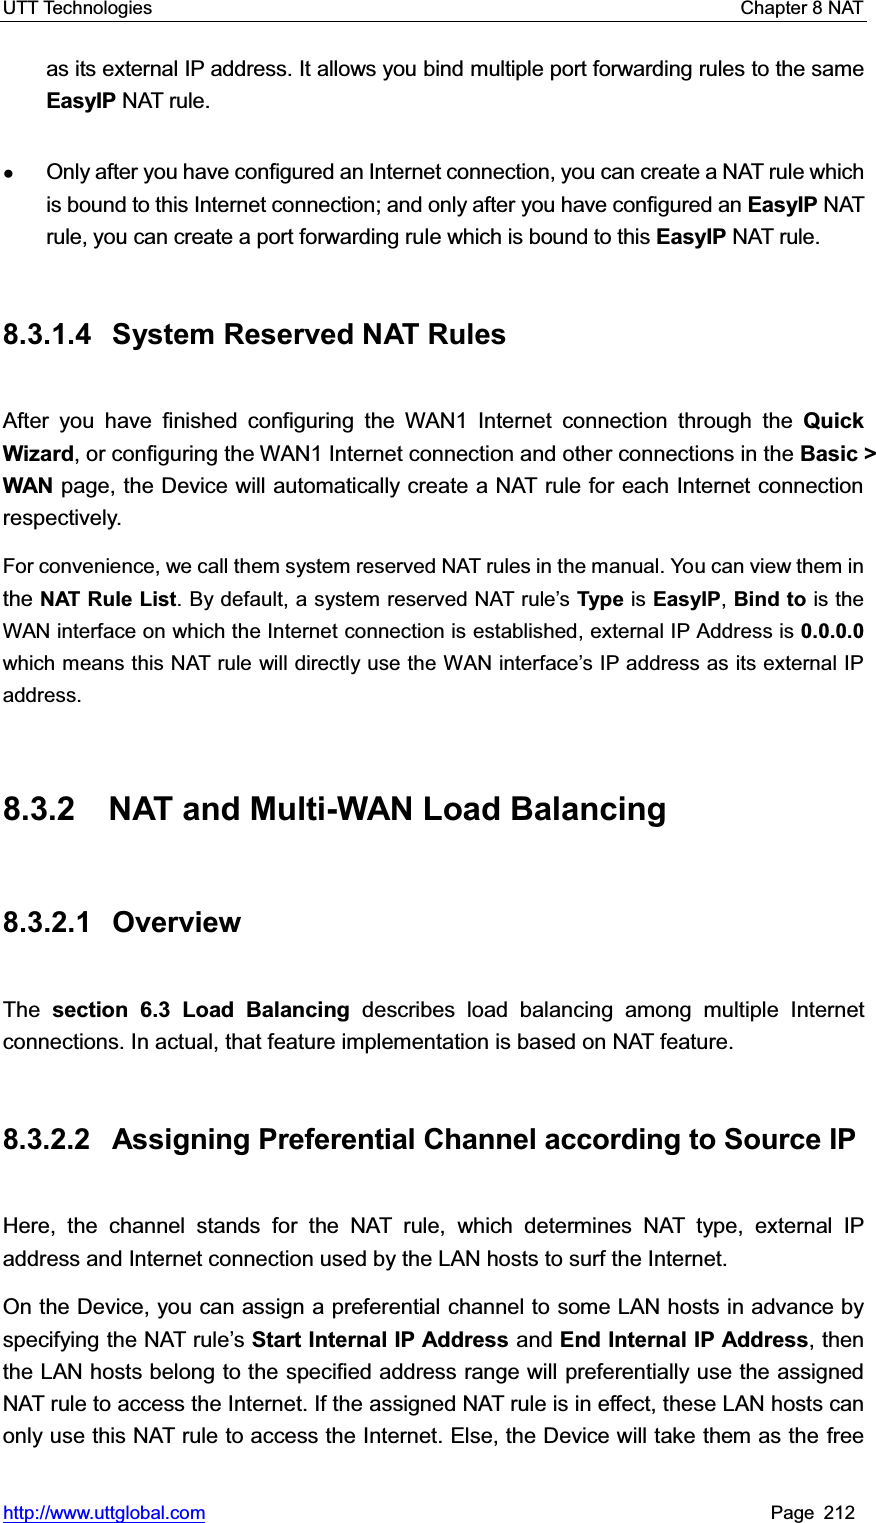 UTT Technologies    Chapter 8 NAT   http://www.uttglobal.com Page 212 as its external IP address. It allows you bind multiple port forwarding rules to the same EasyIP NAT rule. ƔOnly after you have configured an Internet connection, you can create a NAT rule which is bound to this Internet connection; and only after you have configured an EasyIP NAT rule, you can create a port forwarding rule which is bound to this EasyIP NAT rule. 8.3.1.4 System Reserved NAT Rules After you have finished configuring the WAN1 Internet connection through the QuickWizard, or configuring the WAN1 Internet connection and other connections in the Basic &gt; WAN page, the Device will automatically create a NAT rule for each Internet connection respectively.  For convenience, we call them system reserved NAT rules in the manual. You can view them inthe NAT Rule List. By default, a system reserved NAT rule¶s Type is EasyIP,Bind to is the WAN interface on which the Internet connection is established, external IP Address is 0.0.0.0which means this NAT rule will directly use the WAN interface¶s IP address as its external IP address.  8.3.2  NAT and Multi-WAN Load Balancing 8.3.2.1 Overview The section 6.3 Load Balancing describes load balancing among multiple Internet connections. In actual, that feature implementation is based on NAT feature. 8.3.2.2  Assigning Preferential Channel according to Source IP Here, the channel stands for the NAT rule, which determines NAT type, external IP address and Internet connection used by the LAN hosts to surf the Internet. On the Device, you can assign a preferential channel to some LAN hosts in advance by specifying the NAT rule¶sStart Internal IP Address and End Internal IP Address, then the LAN hosts belong to the specified address range will preferentially use the assigned NAT rule to access the Internet. If the assigned NAT rule is in effect, these LAN hosts canonly use this NAT rule to access the Internet. Else, the Device will take them as the free 